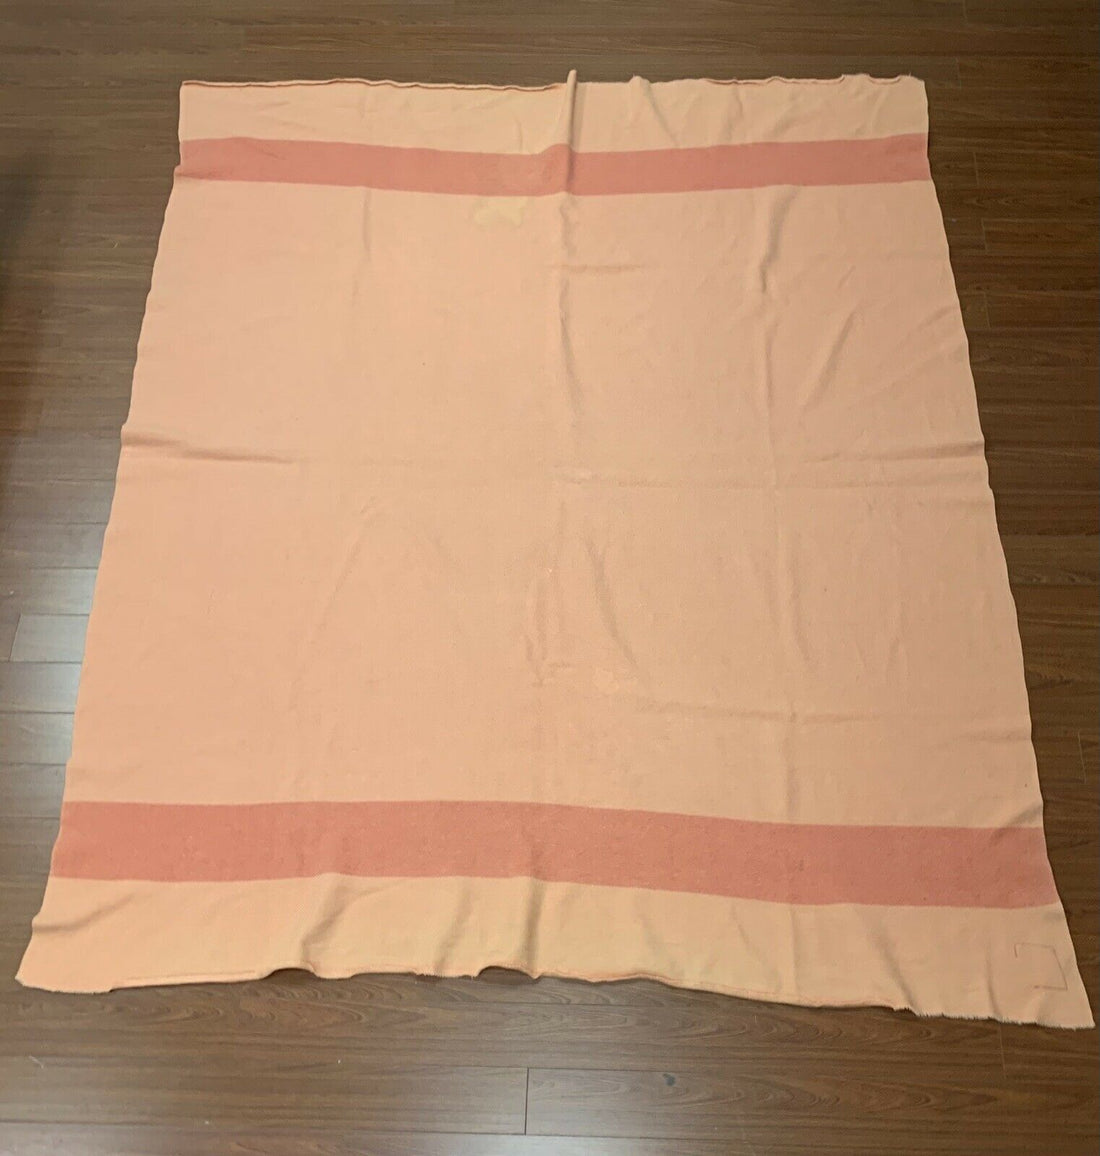 Vintage Eaton Trapper Point 4 Point Wool Blanket 80.5" x 66.5" Pink Made England